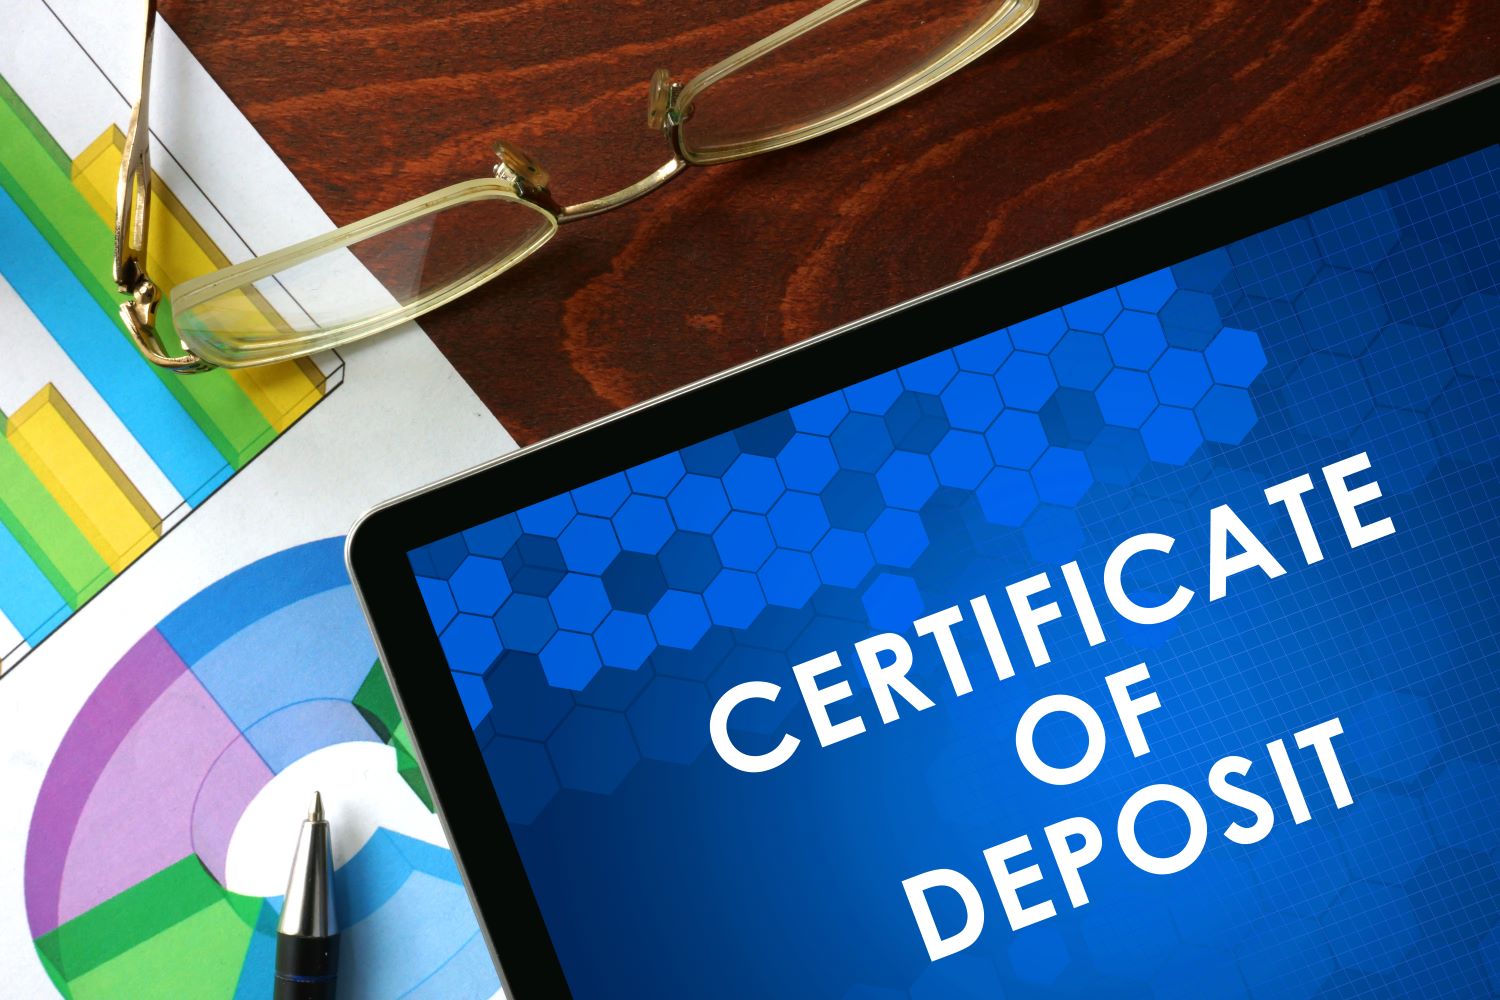 A Certificate of Deposit (CD) is a savings product issued by financial institutions that may provide higher interest rates than a savings account on a lump sum amount deposited